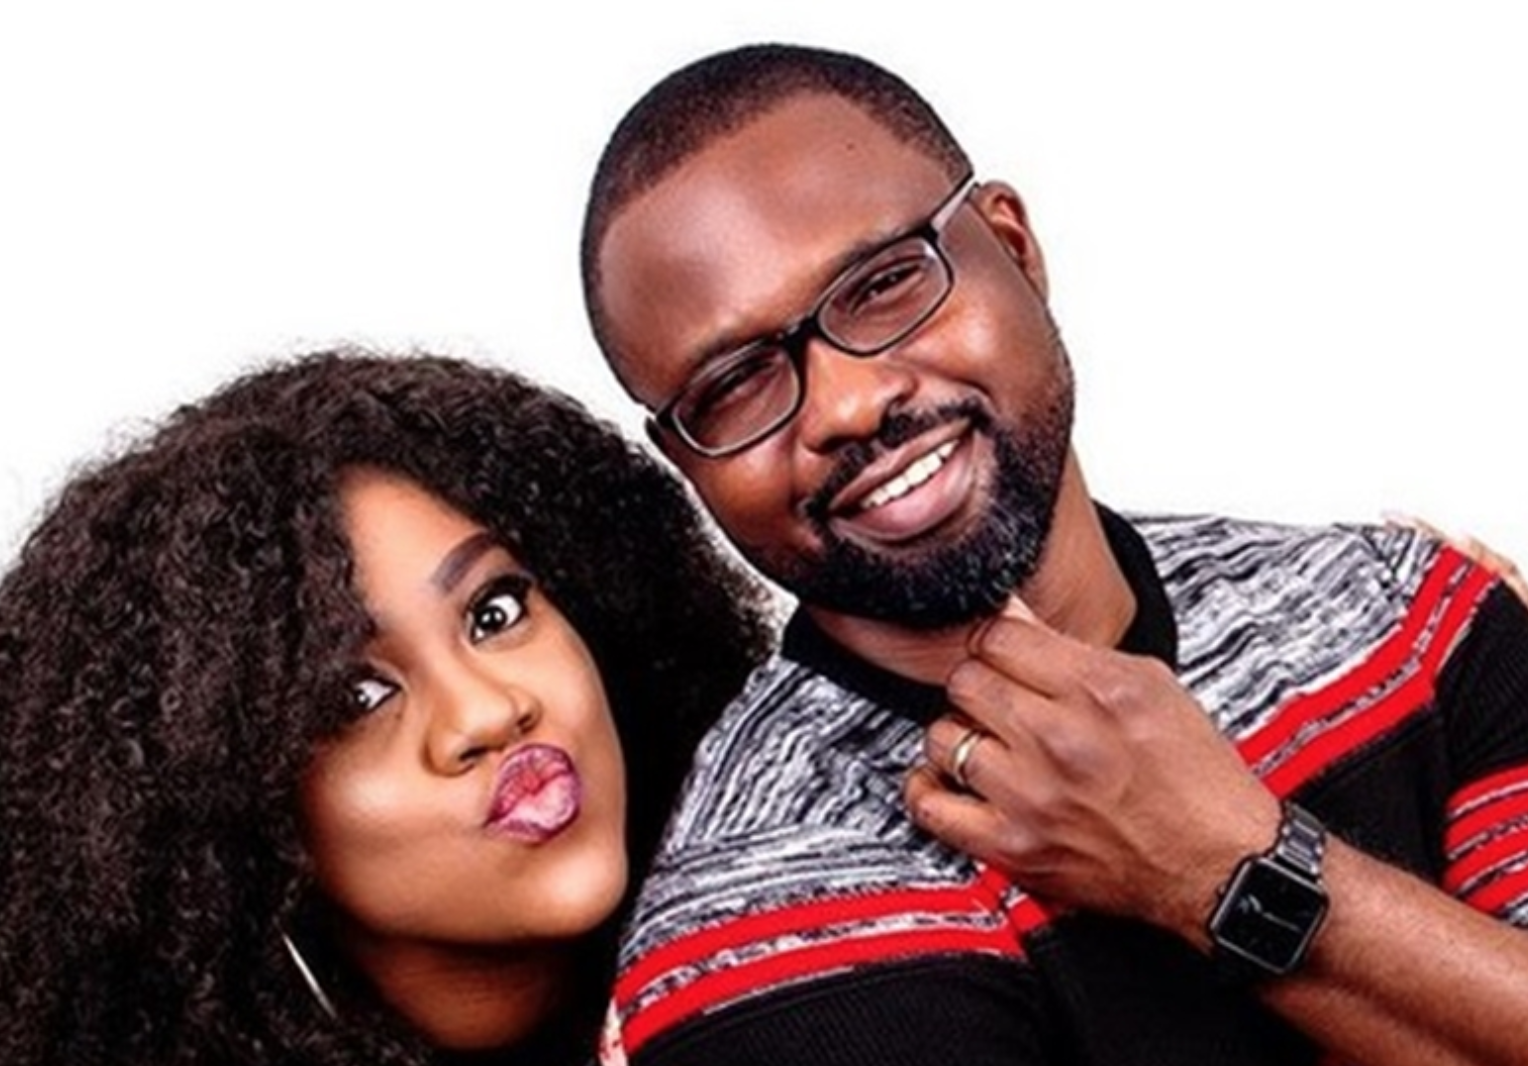 I Found Out My Marriage Had Ended On Youtube - Stella Damasus Speaks On Broken Marriage